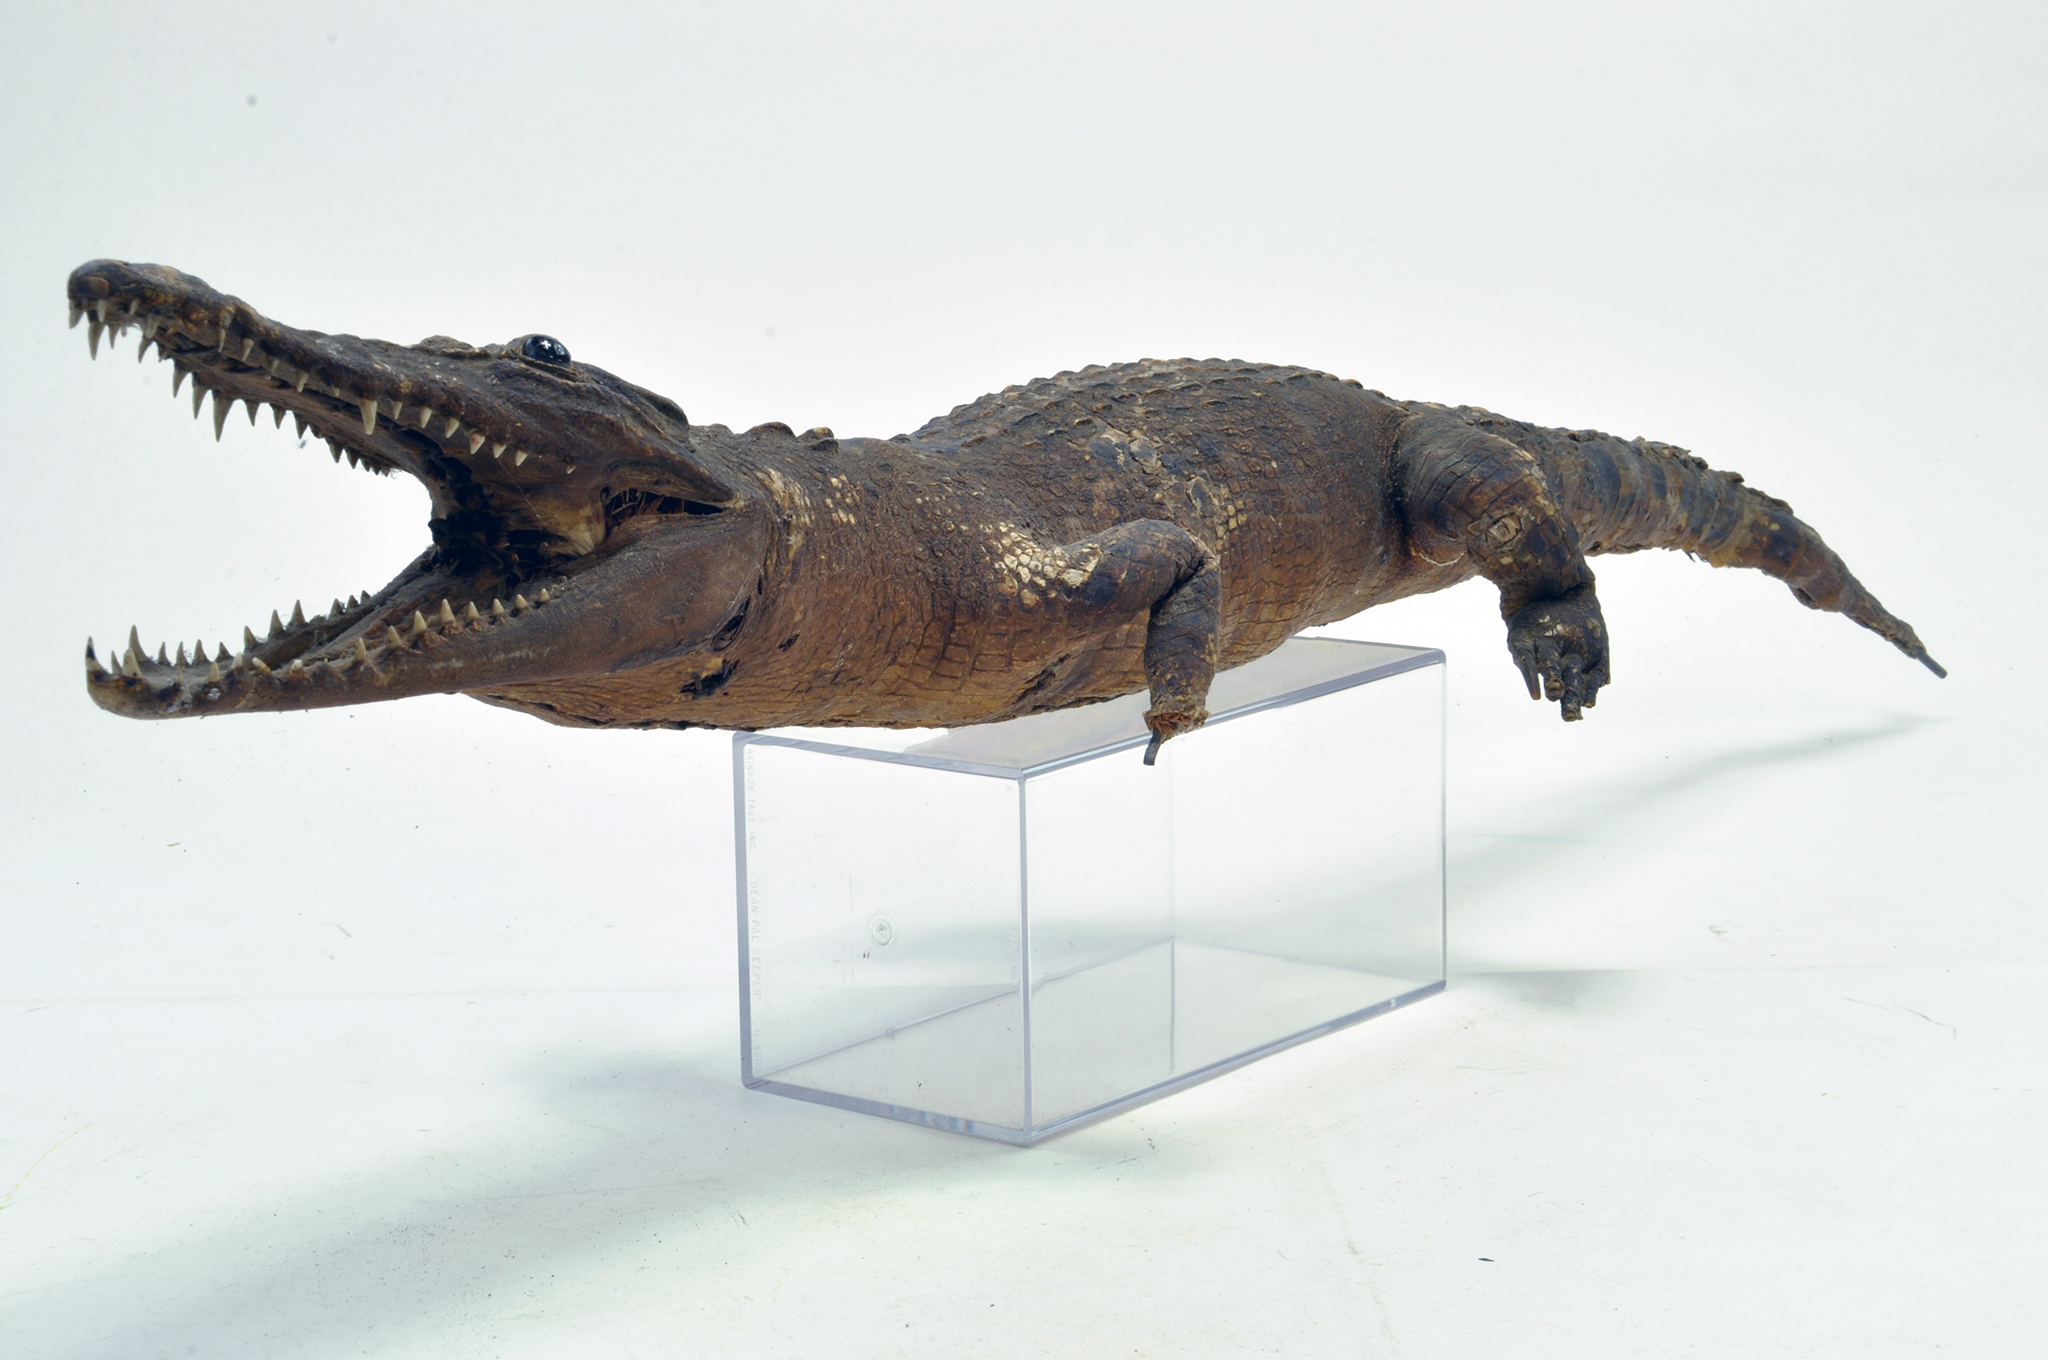 Taxidermy: An early 20th Century example of an Alligator. Missing Foot. Measures 1.05 M Long from